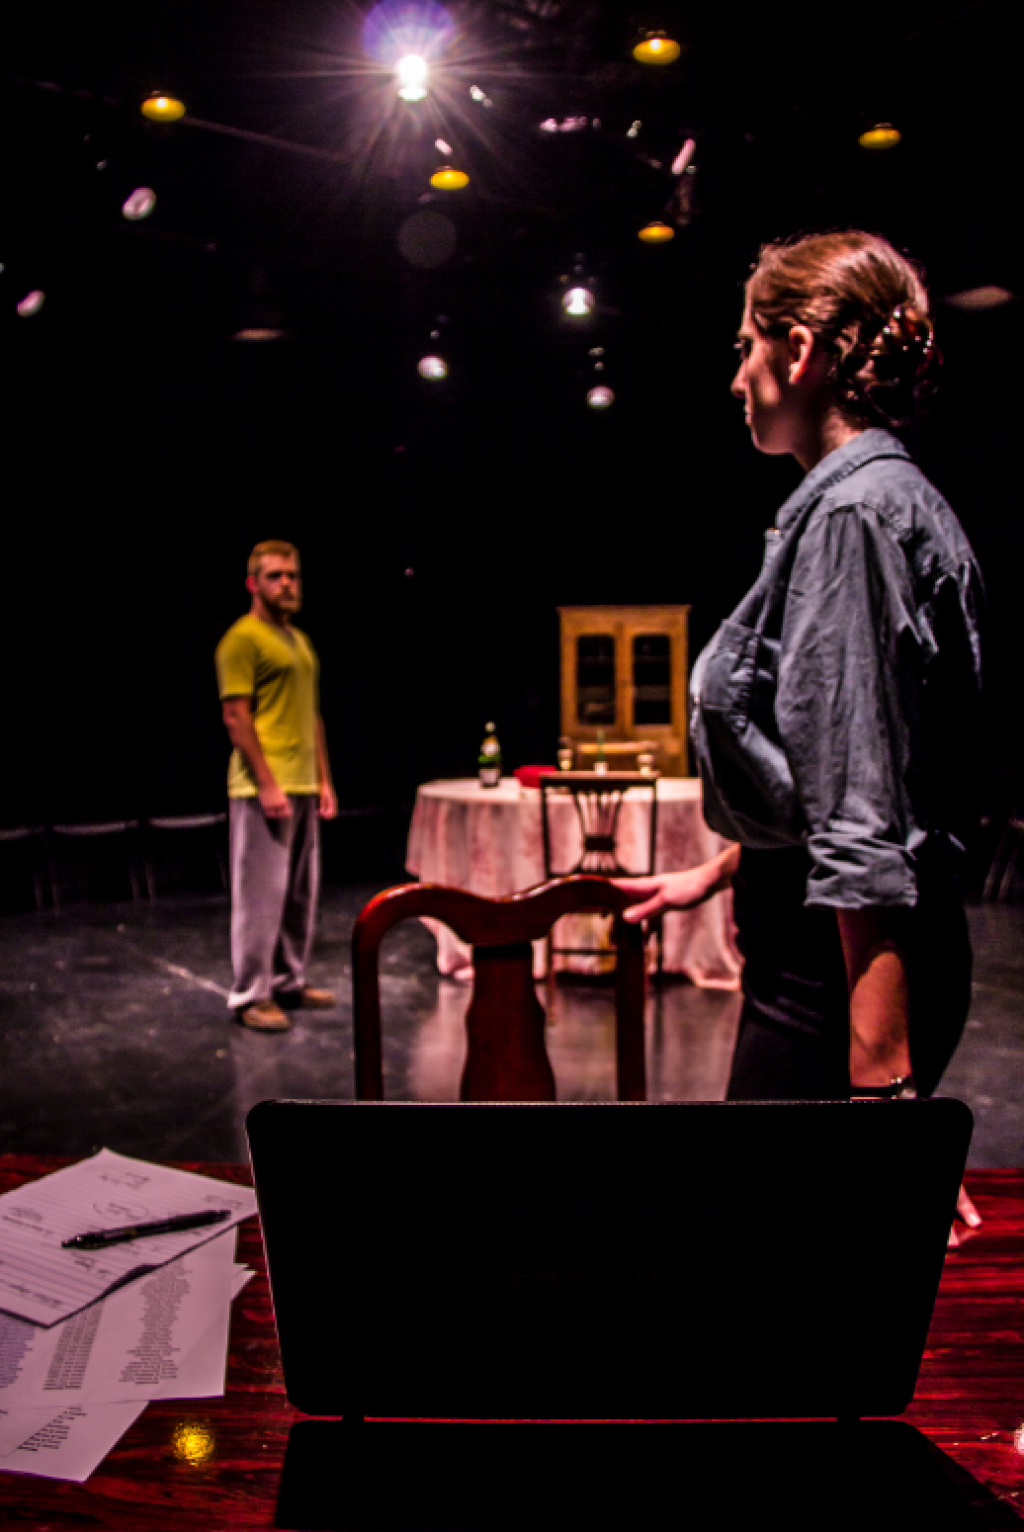 Masters of Theater Arts students script their own learning